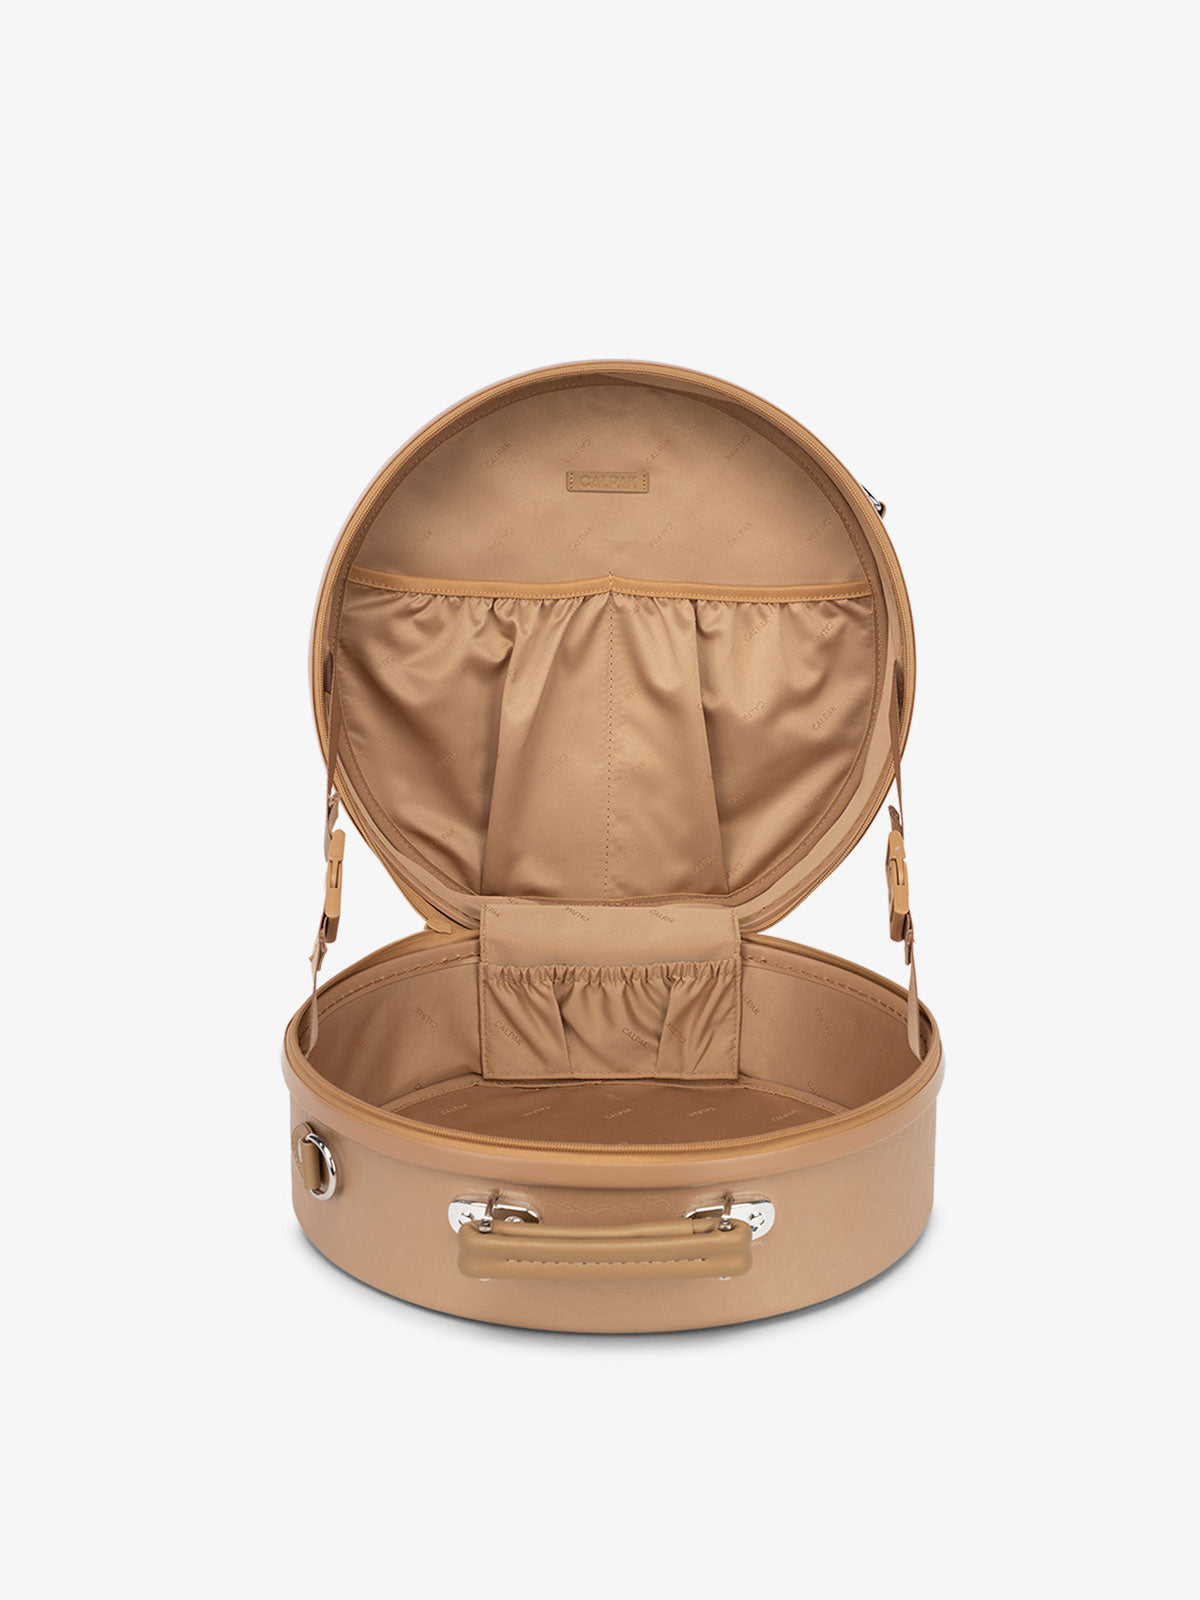 interior of beige almond Trnk small travel hat box